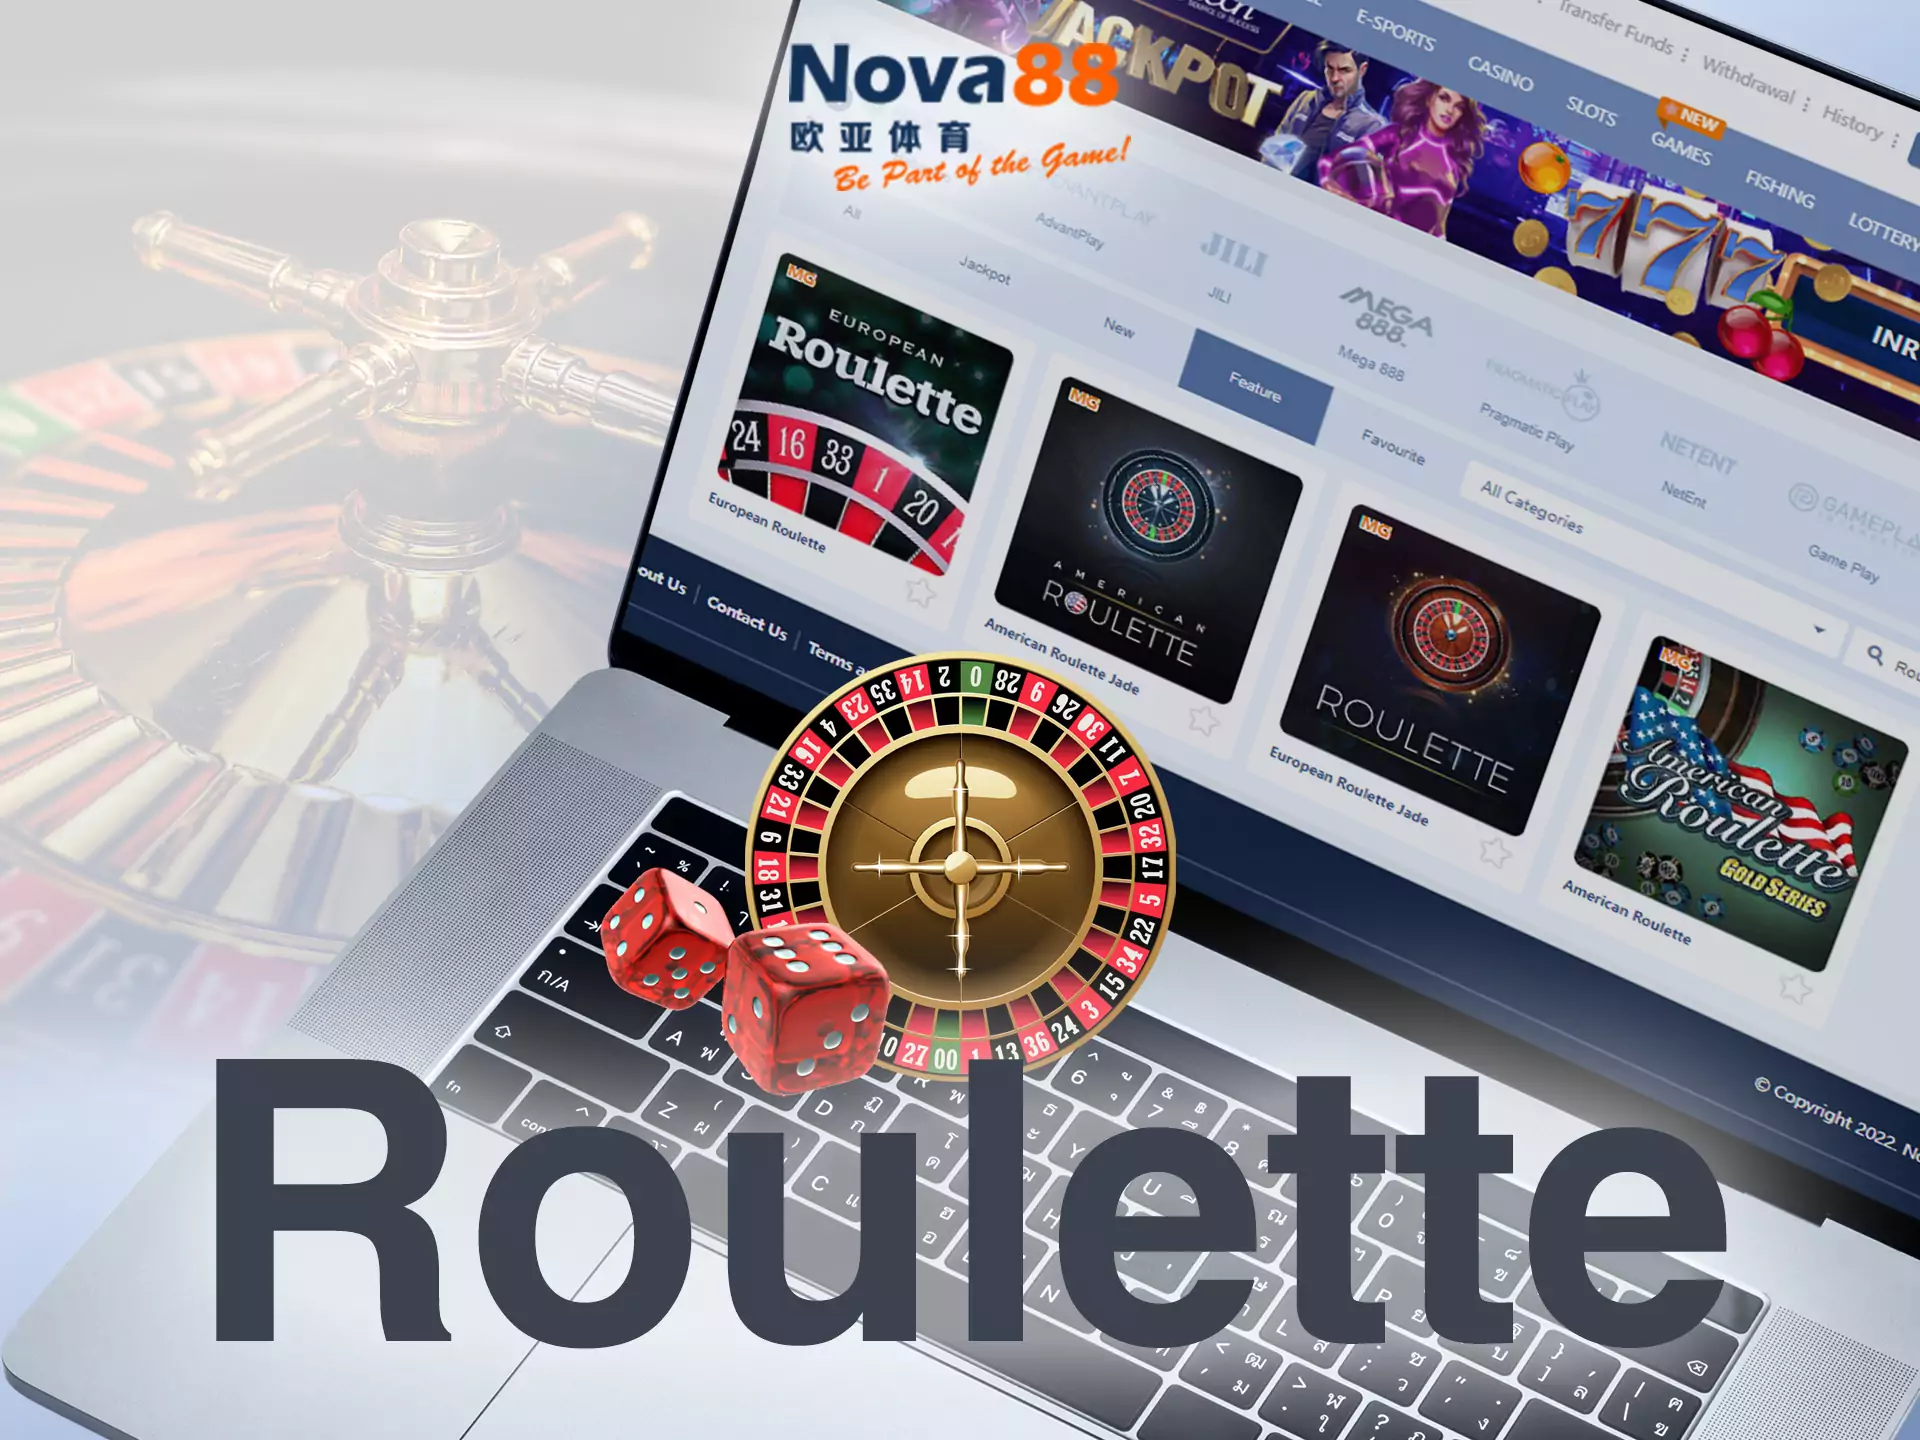 In the Nova88 casino, you find many variants of roulette.